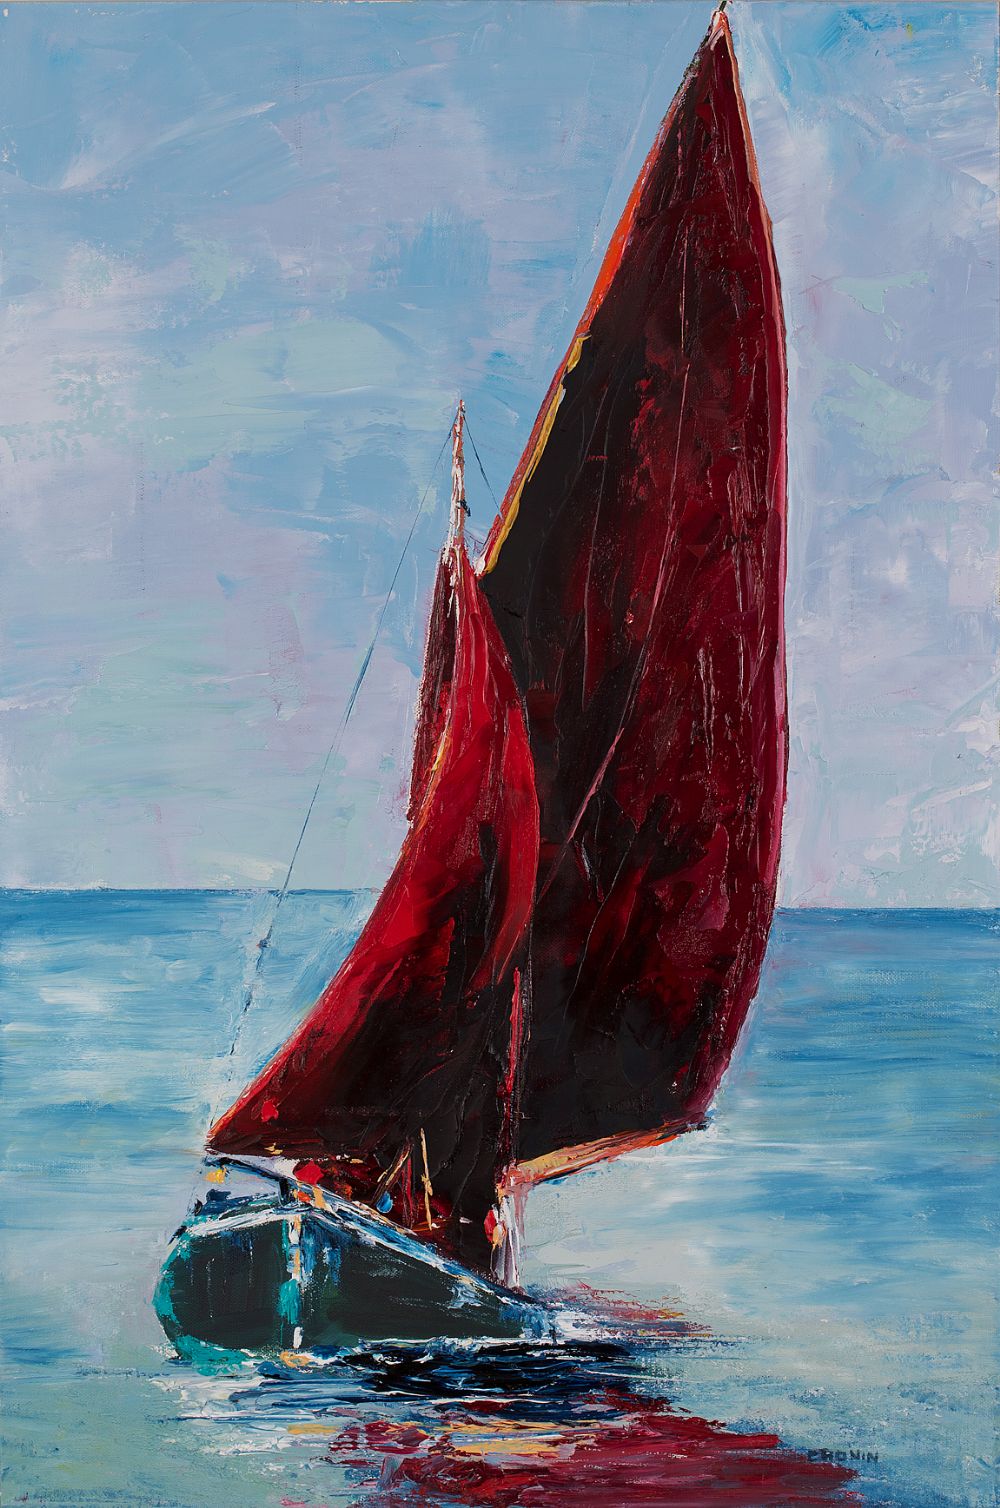 Lot 11 - RED SAILS OFF ROUNDSTONE by Susan Cronin, b.1965